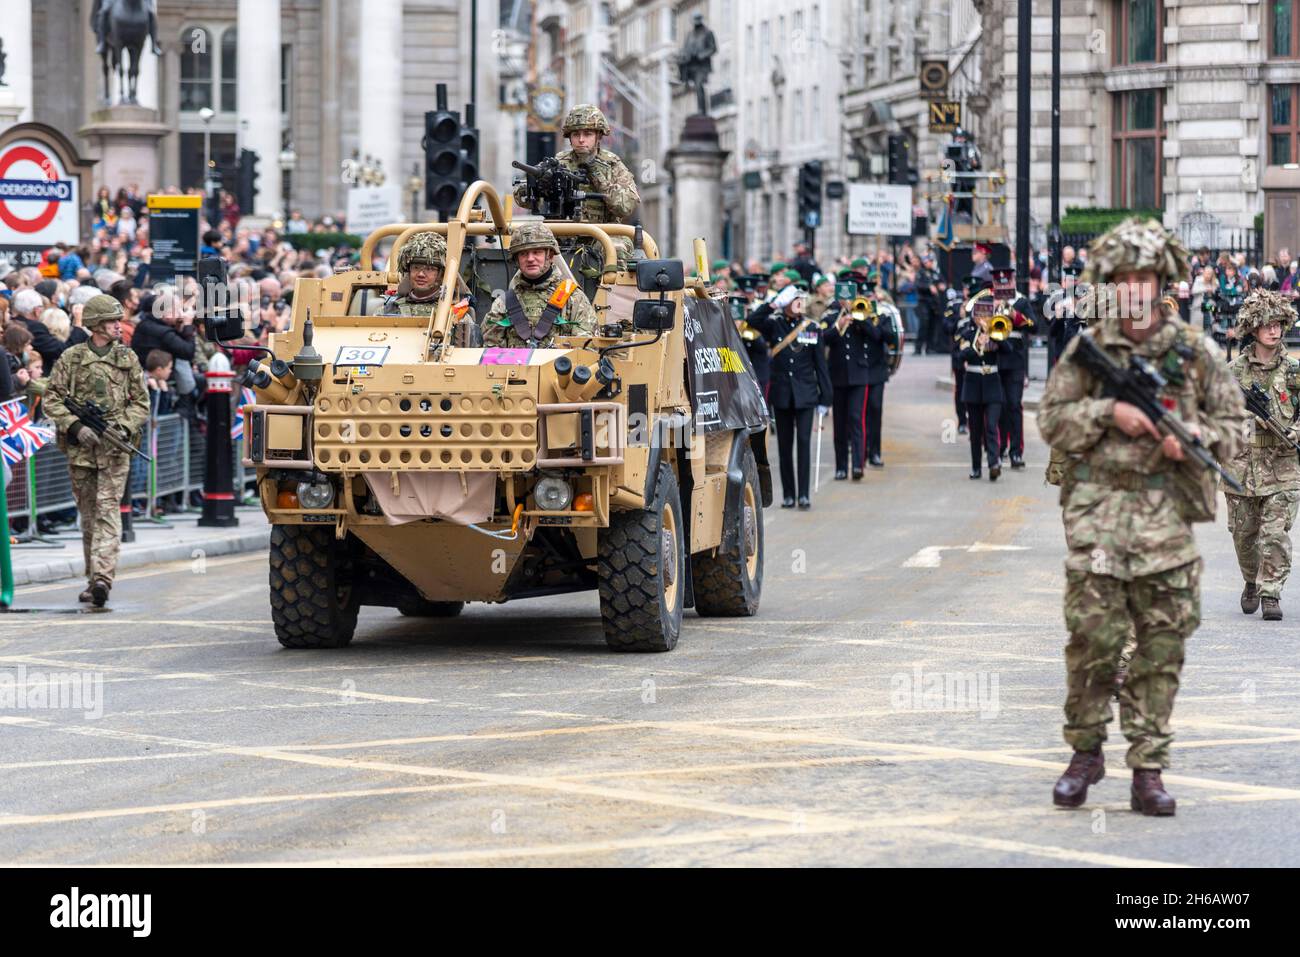 The Royal Yeomanry, Army Reserve, light cavalry regiment at the Lord Mayor's Show, Parade, procession passing along Poultry, near Mansion House London Stock Photo